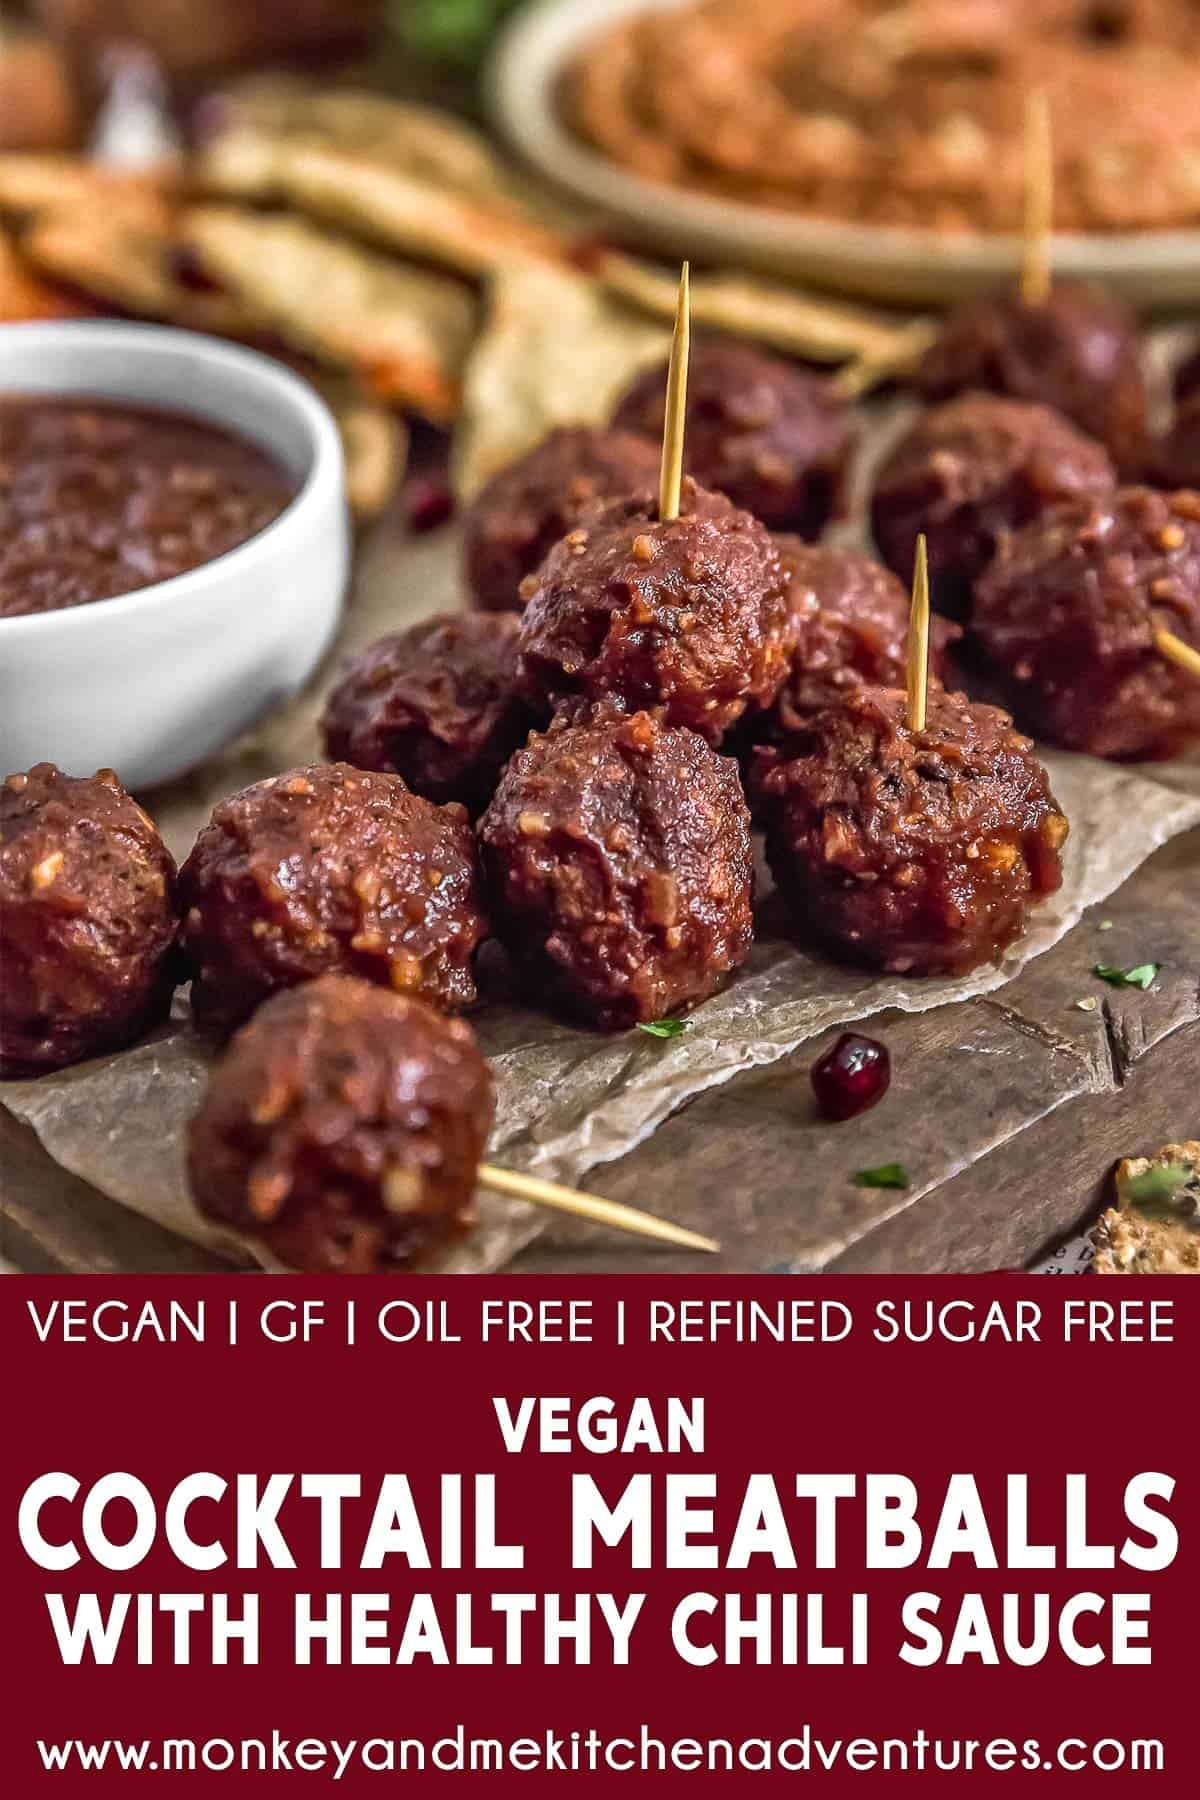 Vegan Cocktail Meatballs with Healthy Chili Sauce with descriptive text